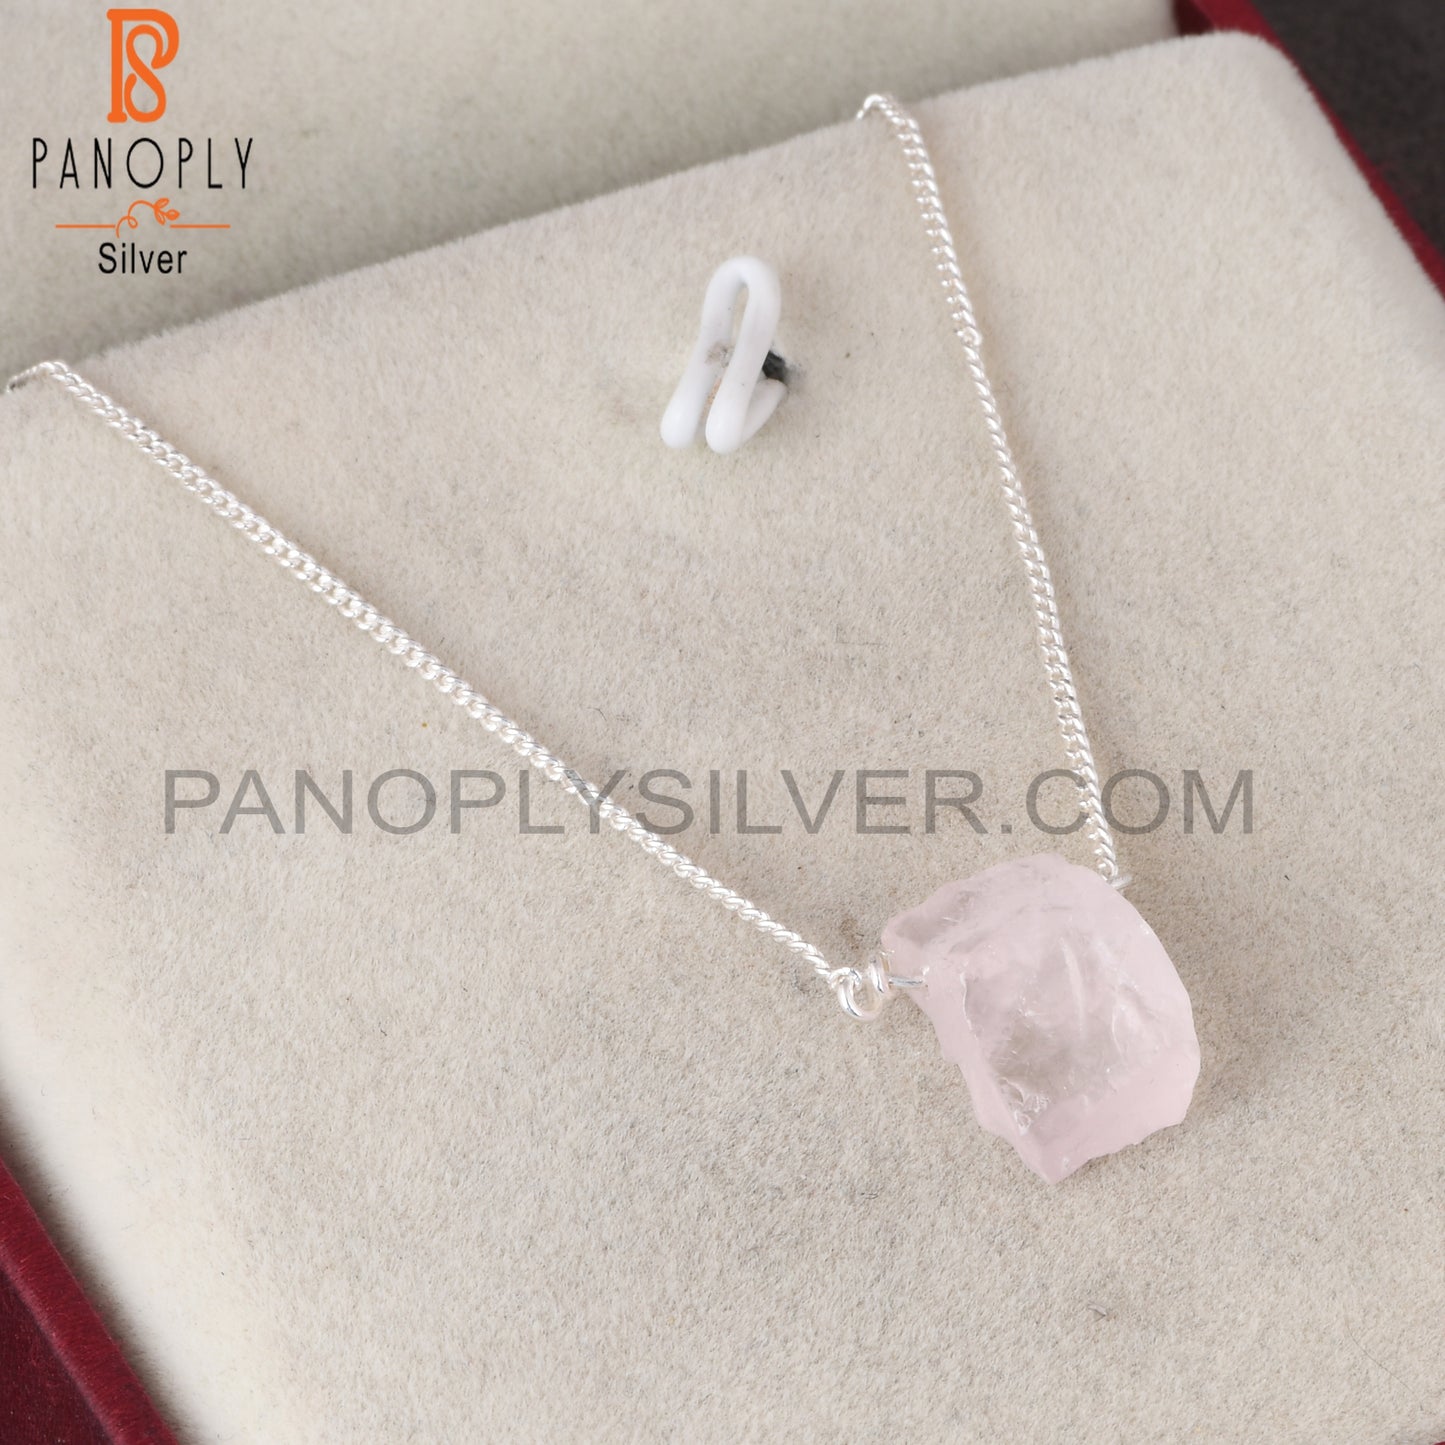 Rose Quartz 925 Sterling Silver Pendant With Chain